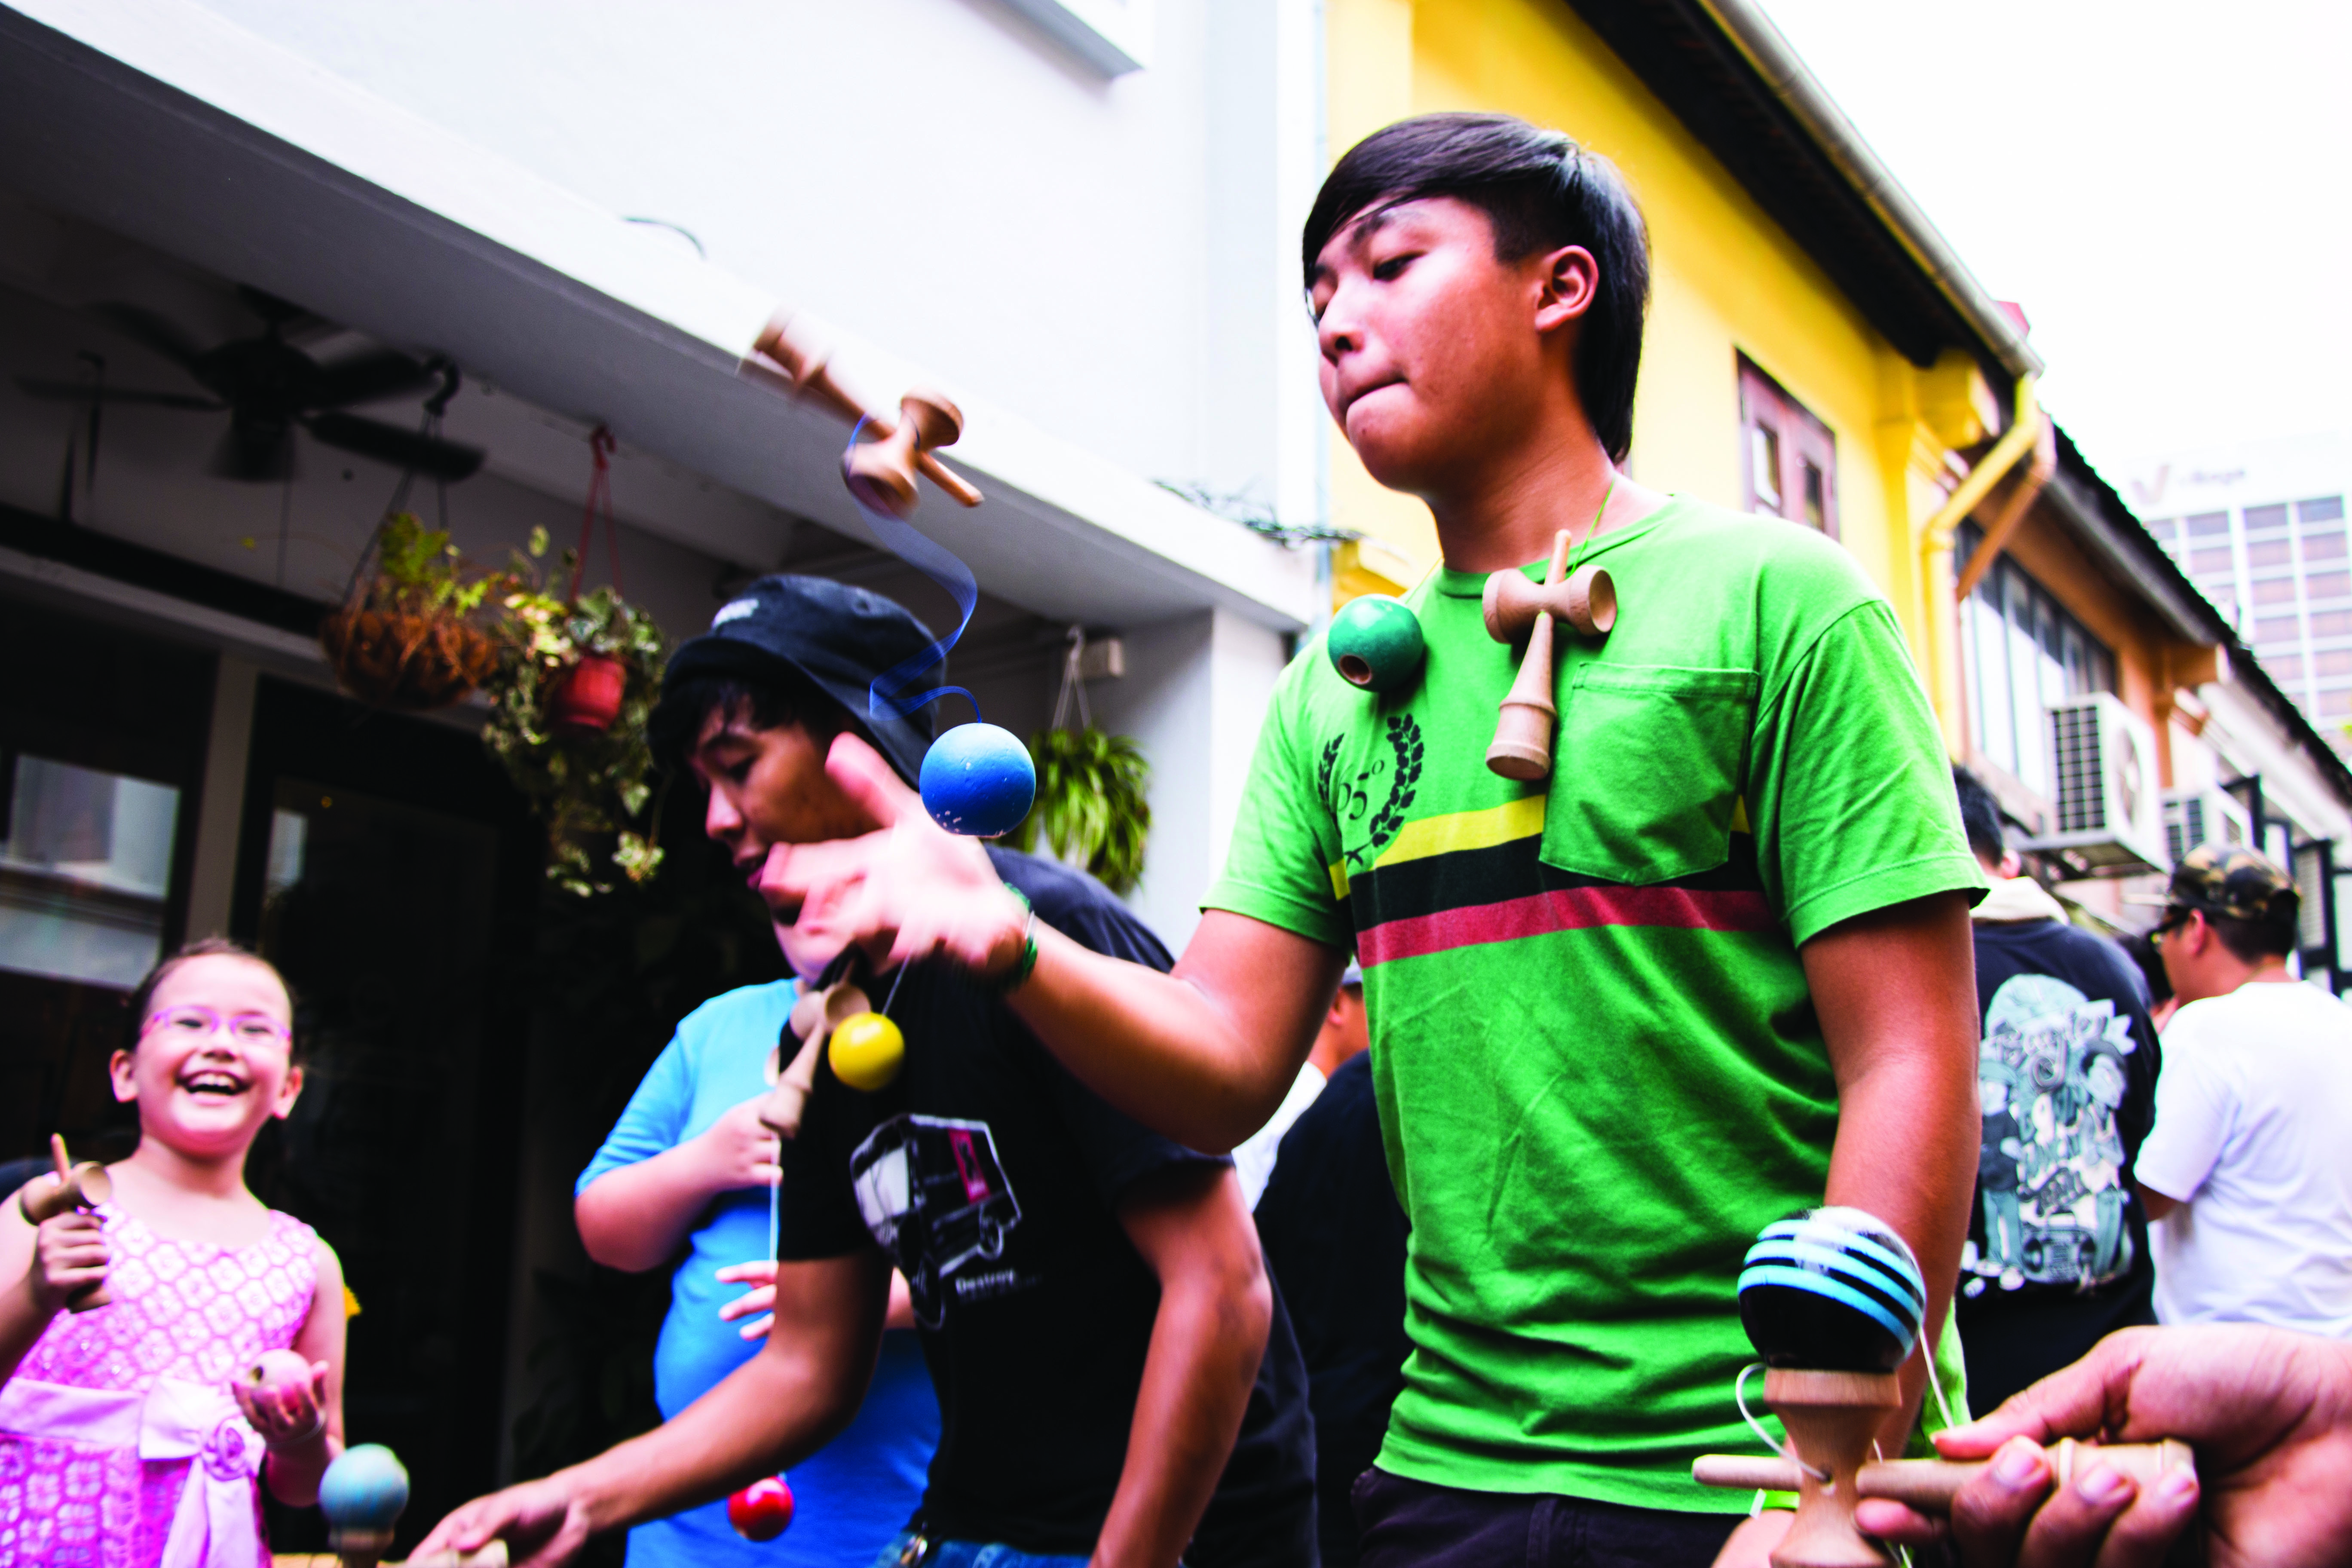 HERE’S HOW IT ALL BEGAN: Local fashion and kendama retailer WoofMeow organised their first kendama meet at Haji Lane last year. Local enthusiasts met up to participate in this event, winning prizes and simply having a good time. Photo: Azmi Athni